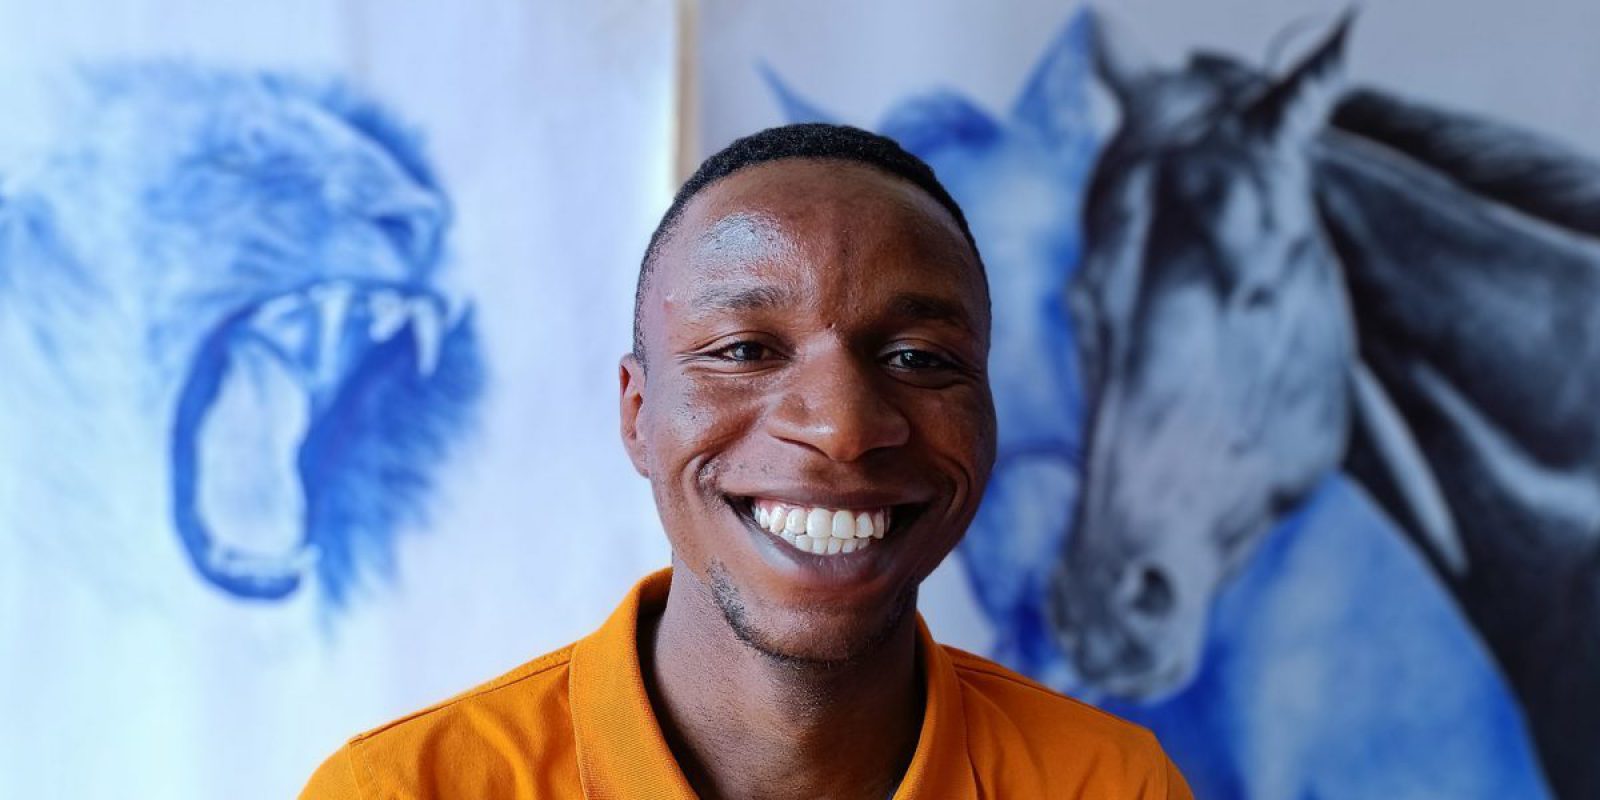 Serge, refugee and pen artist poses with his drawings in the background. Serge is a Congolese refugee and pen artist living in Uganda, where he was sponsored by JRS to pursue his studies and become an engineer.